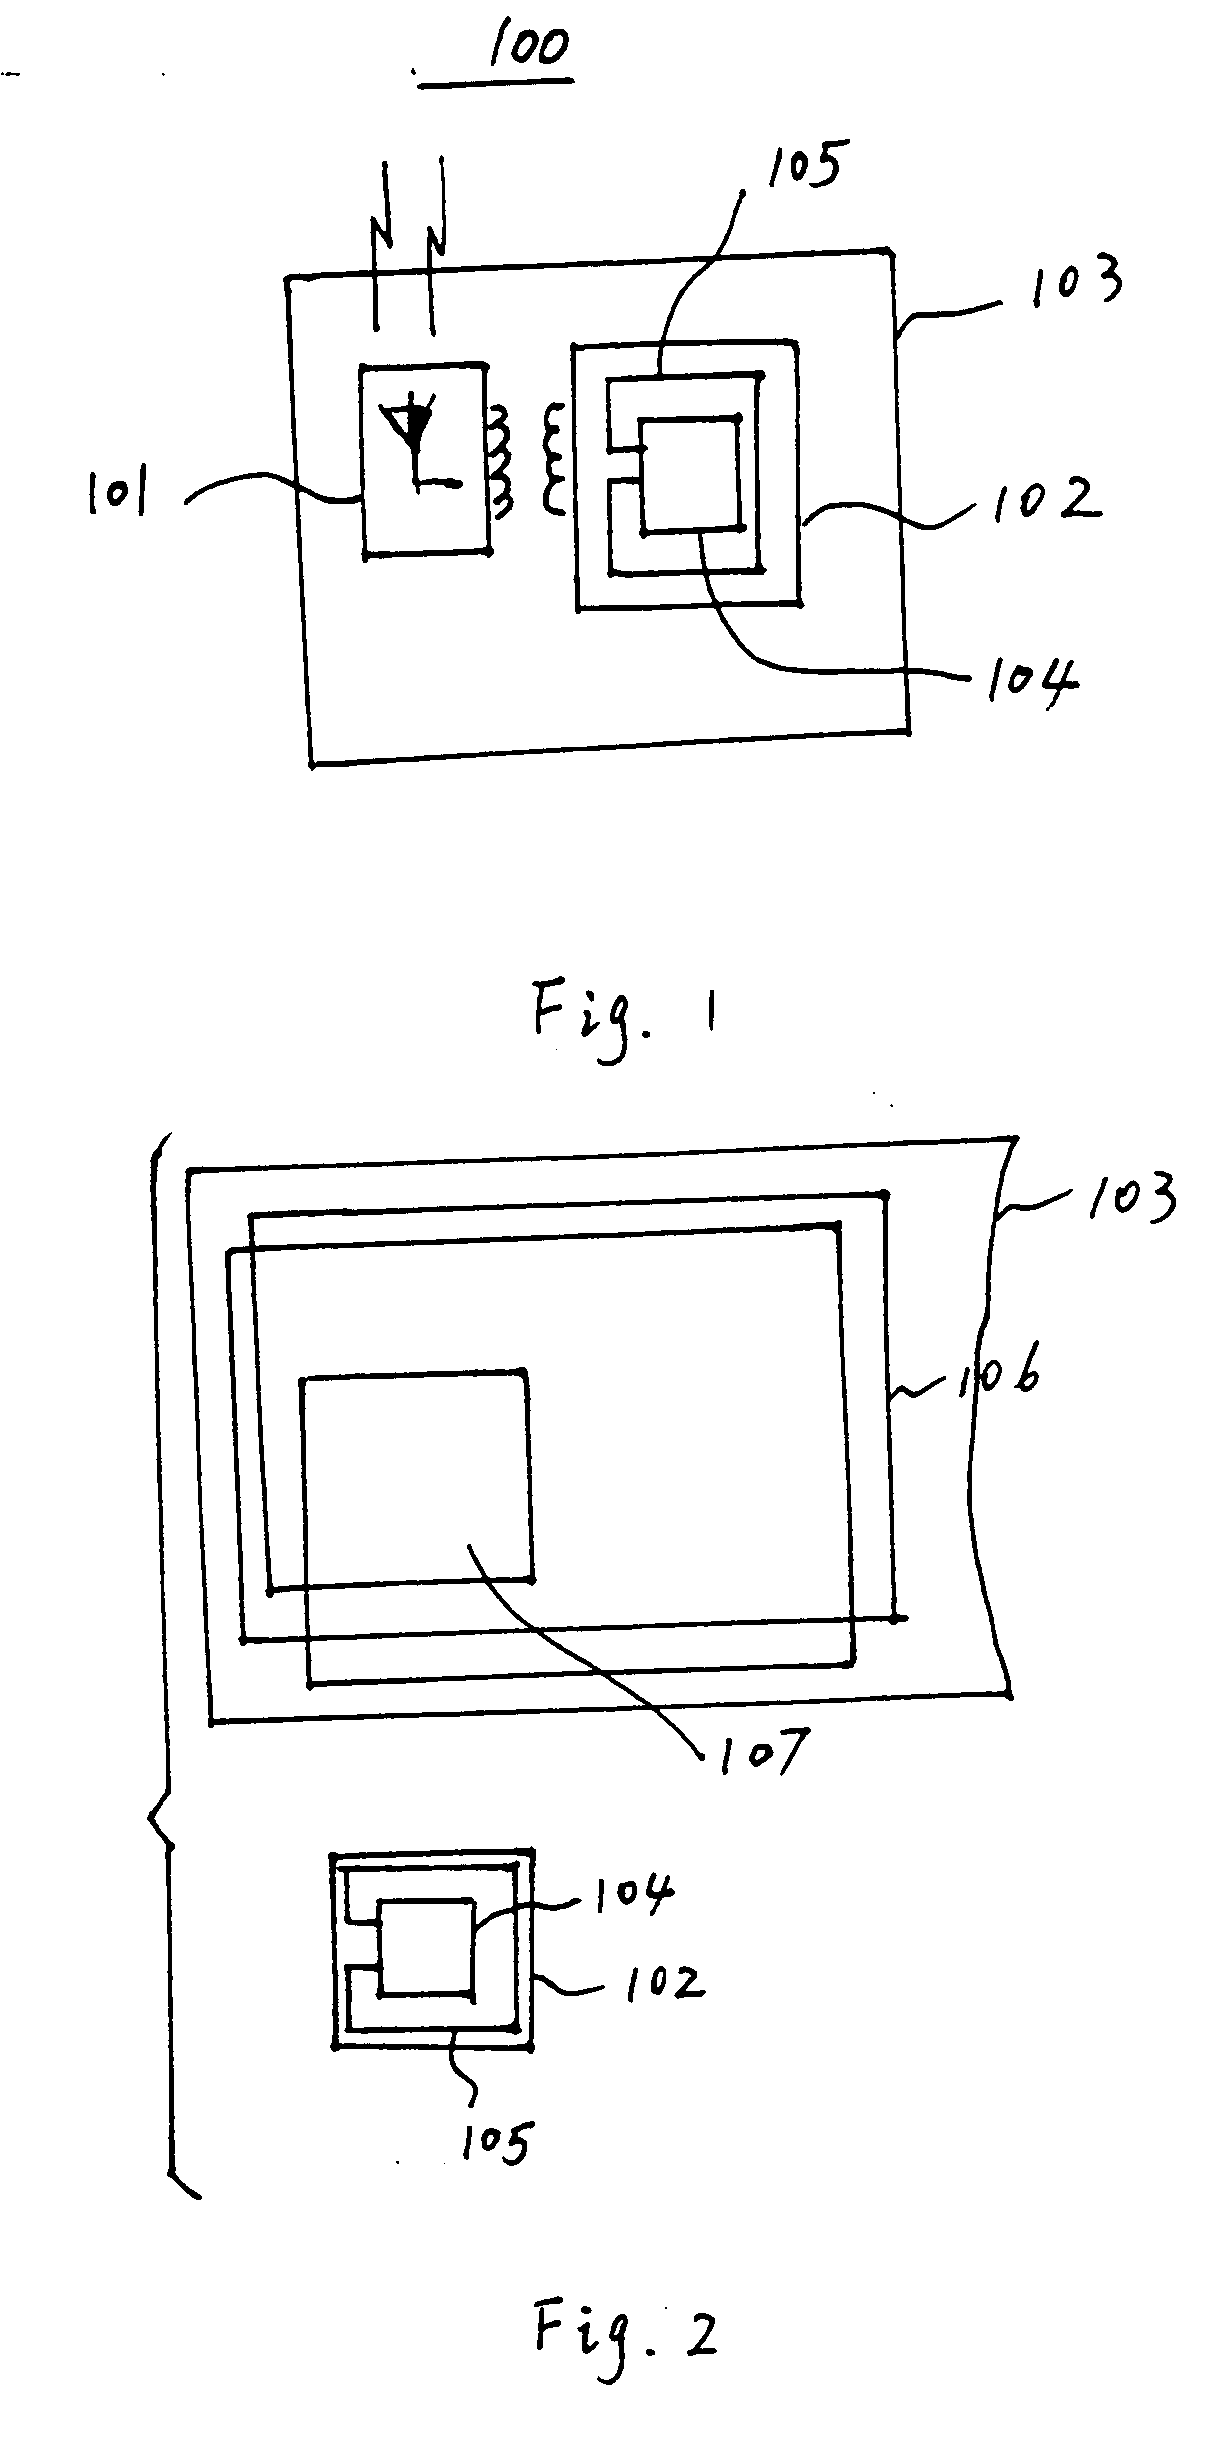 Radio frequency identification tag having an inductively coupled antenna